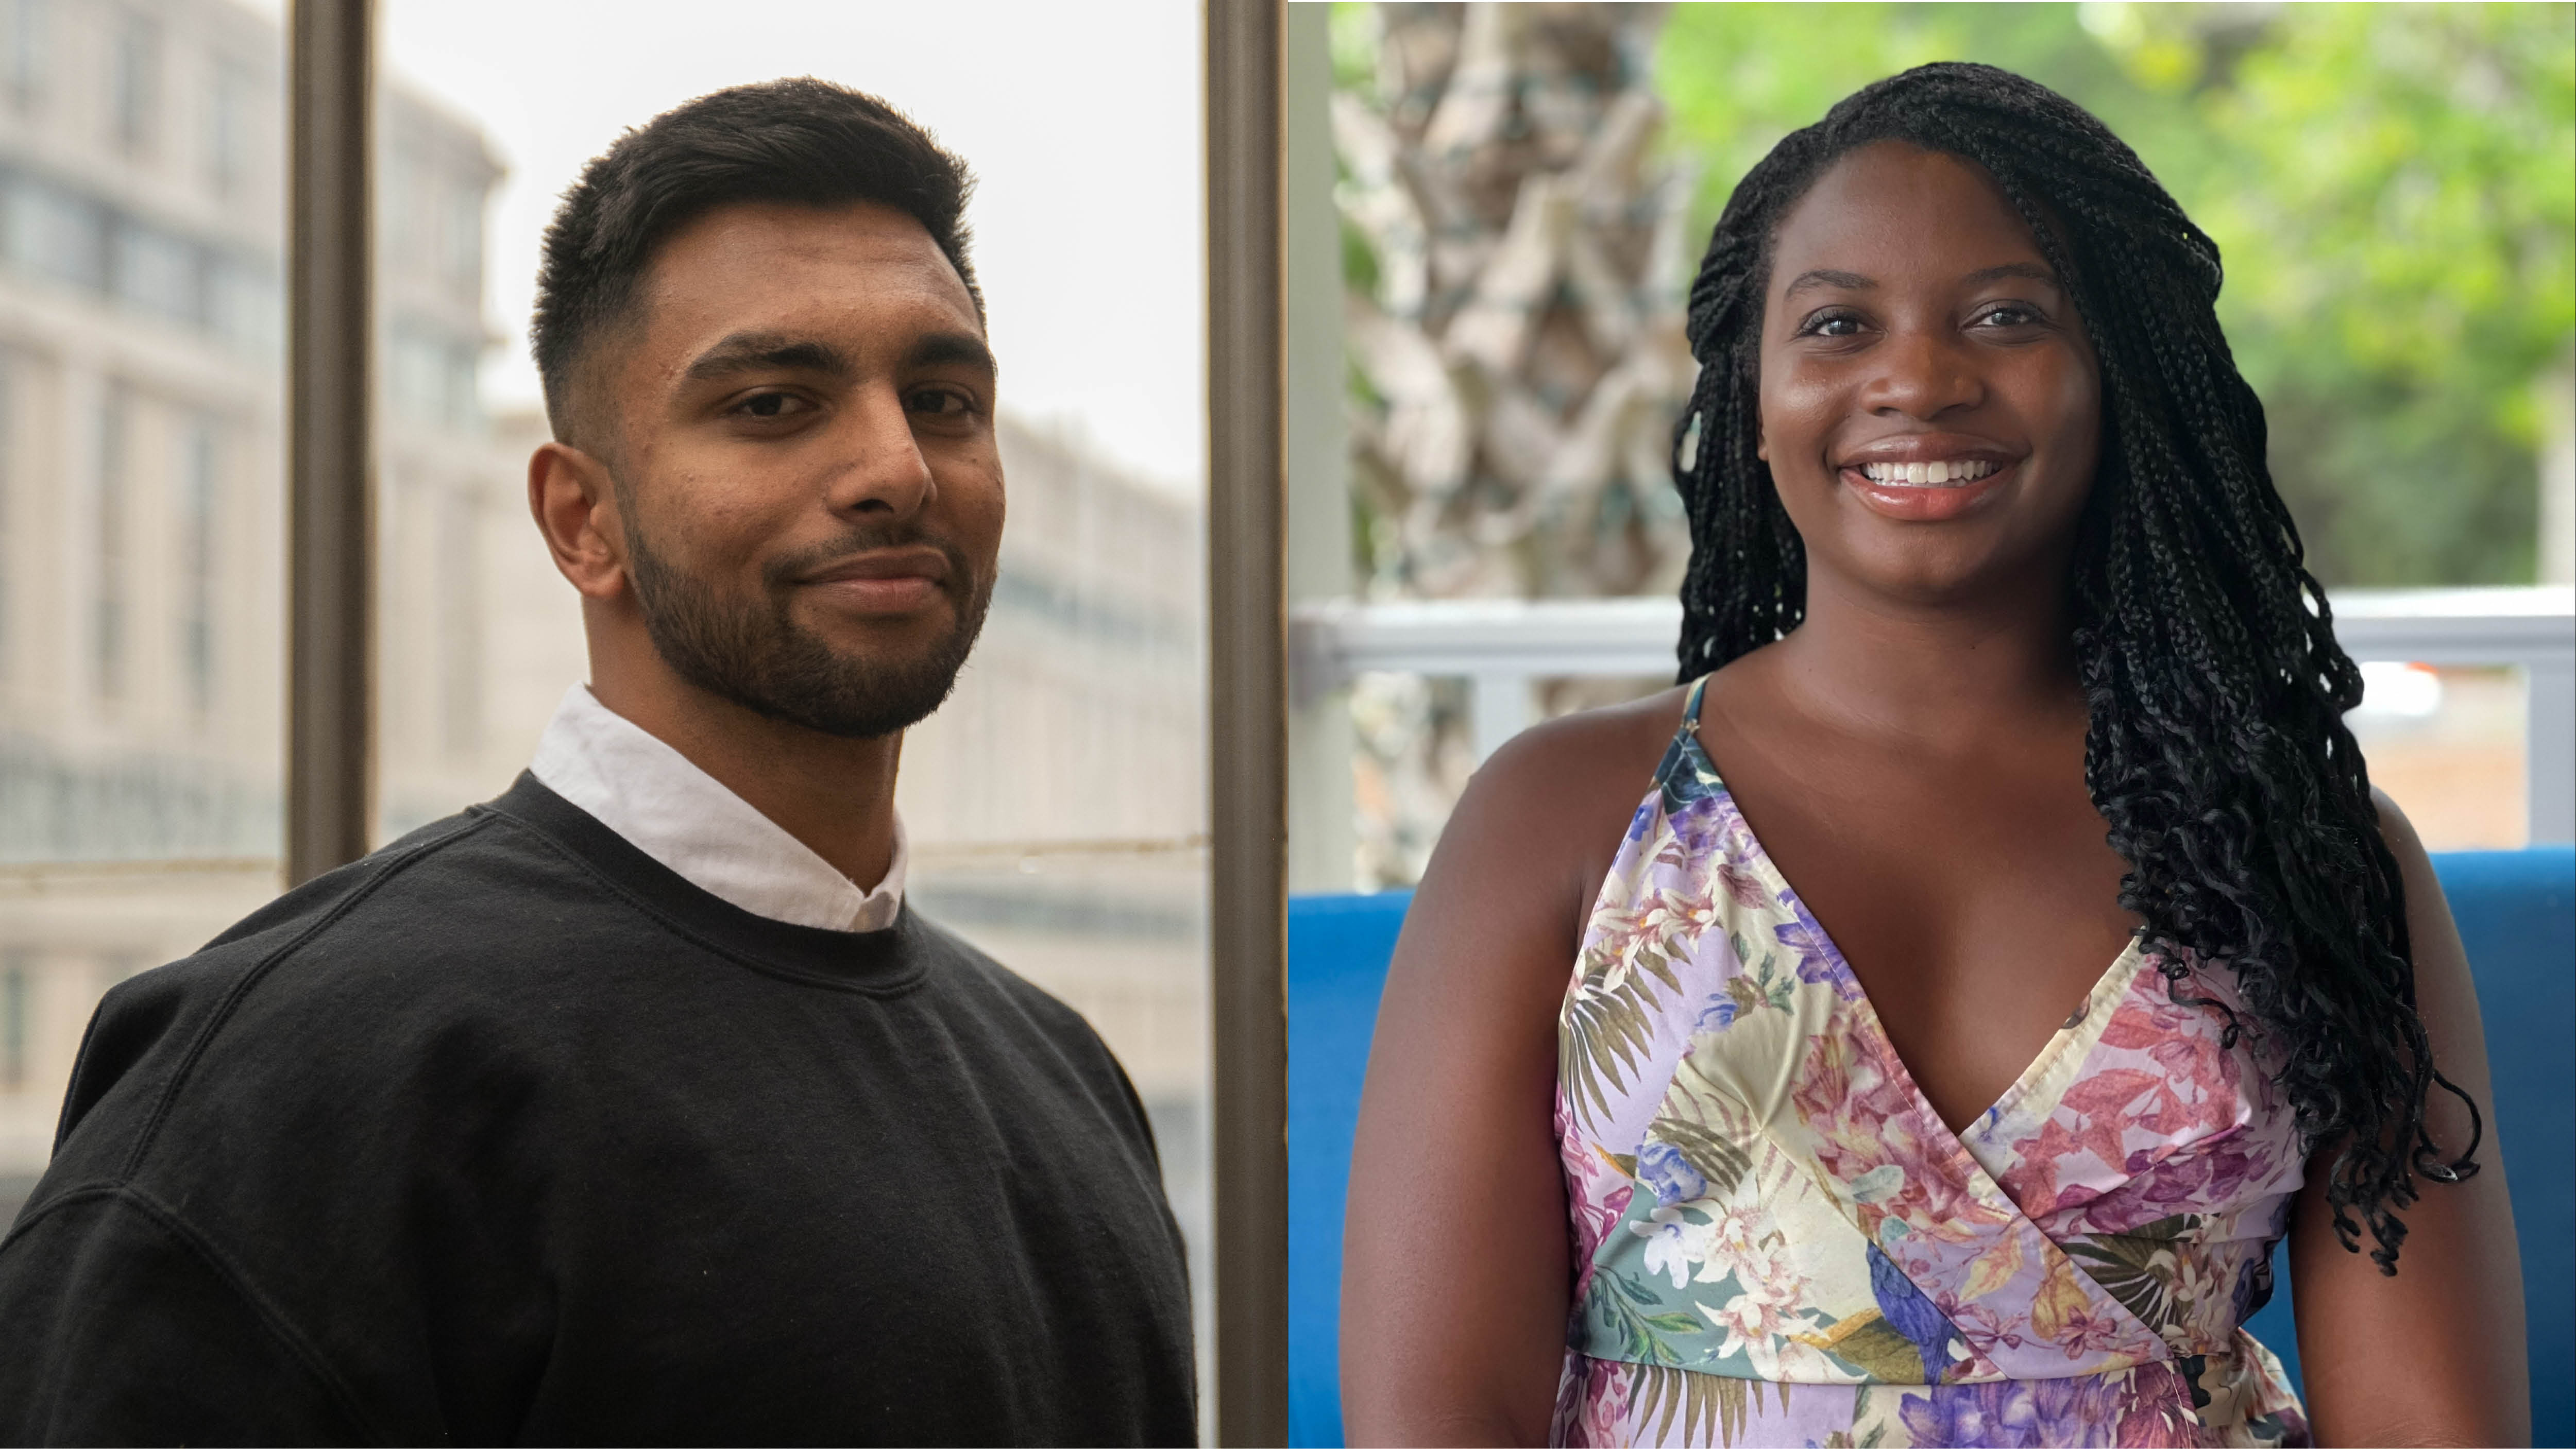 Meelan Dullabh '23 and Monique Boskett, MBA '23, student commencement speakers for the LeBow Class of 2023